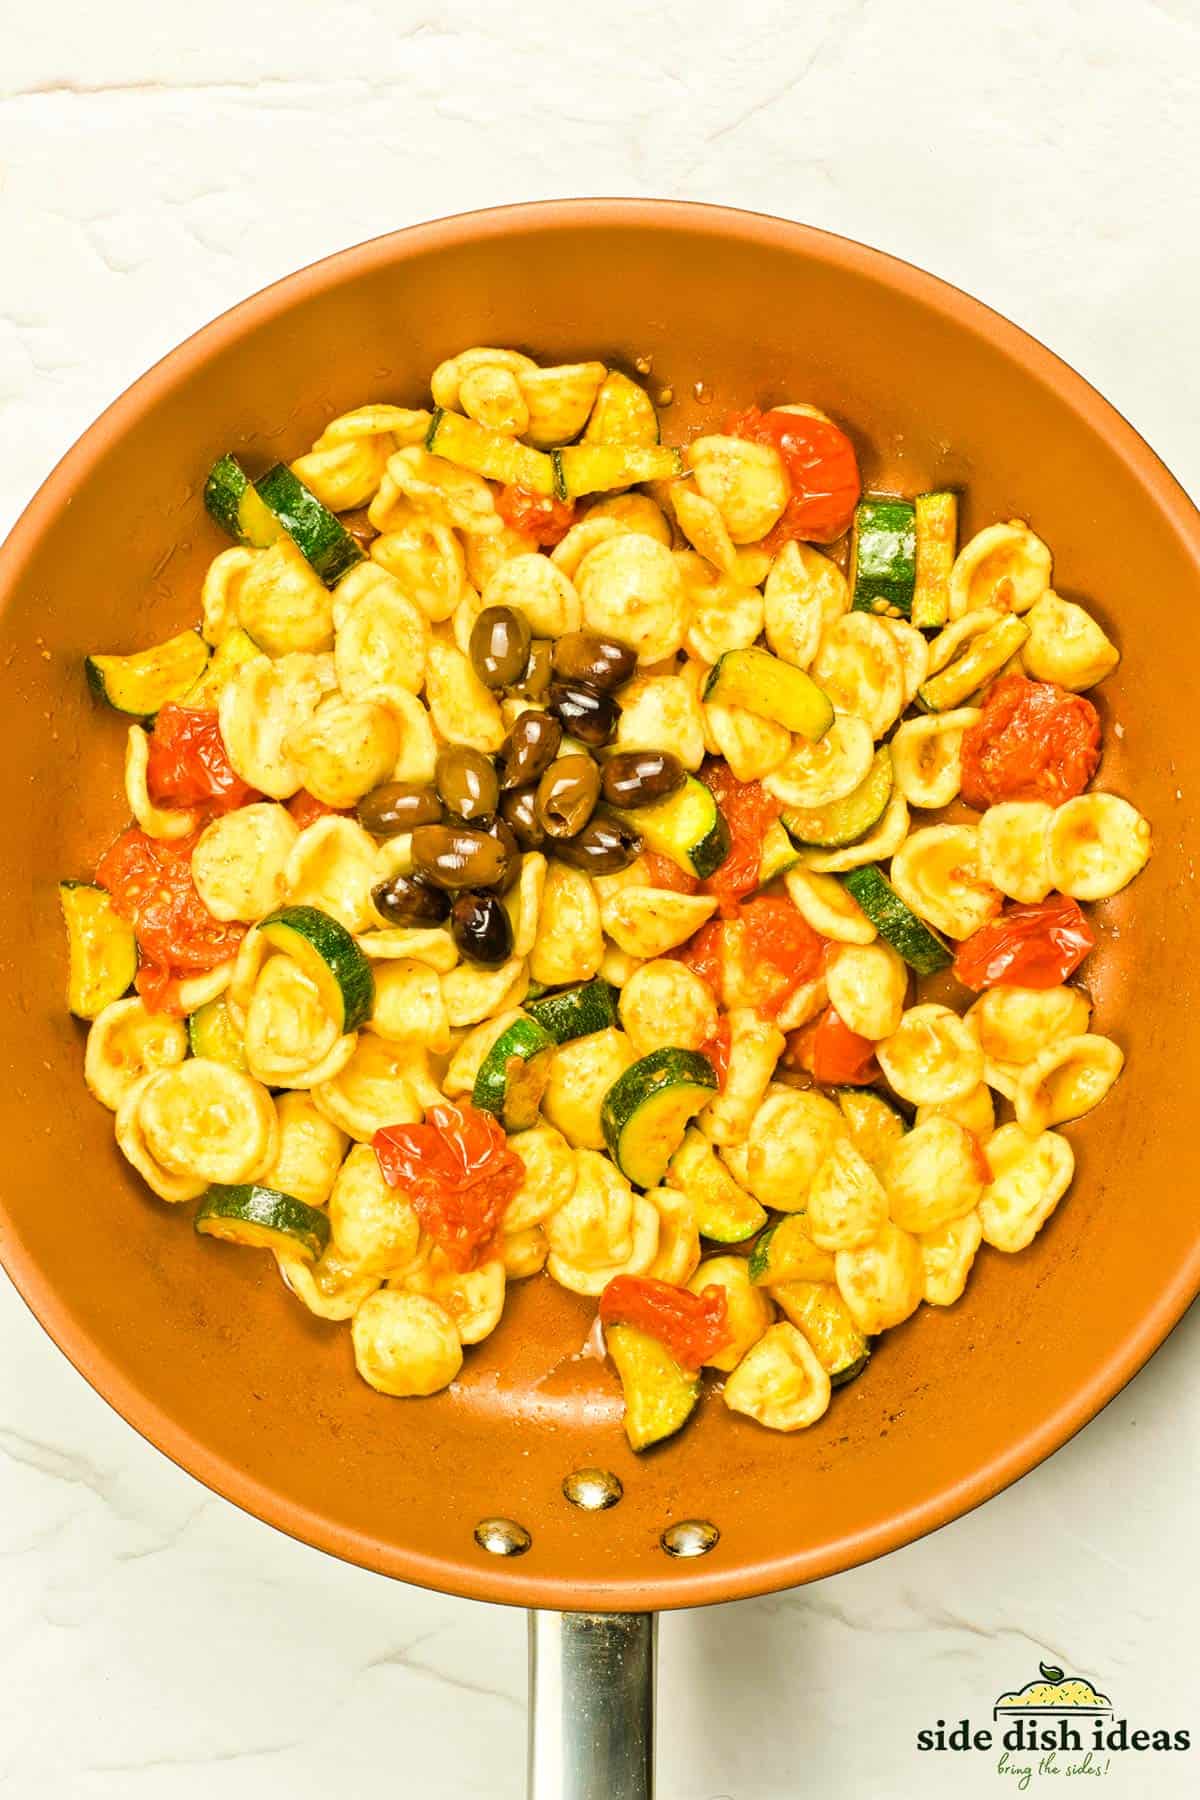 olives added to the pan of pasta and vegetables